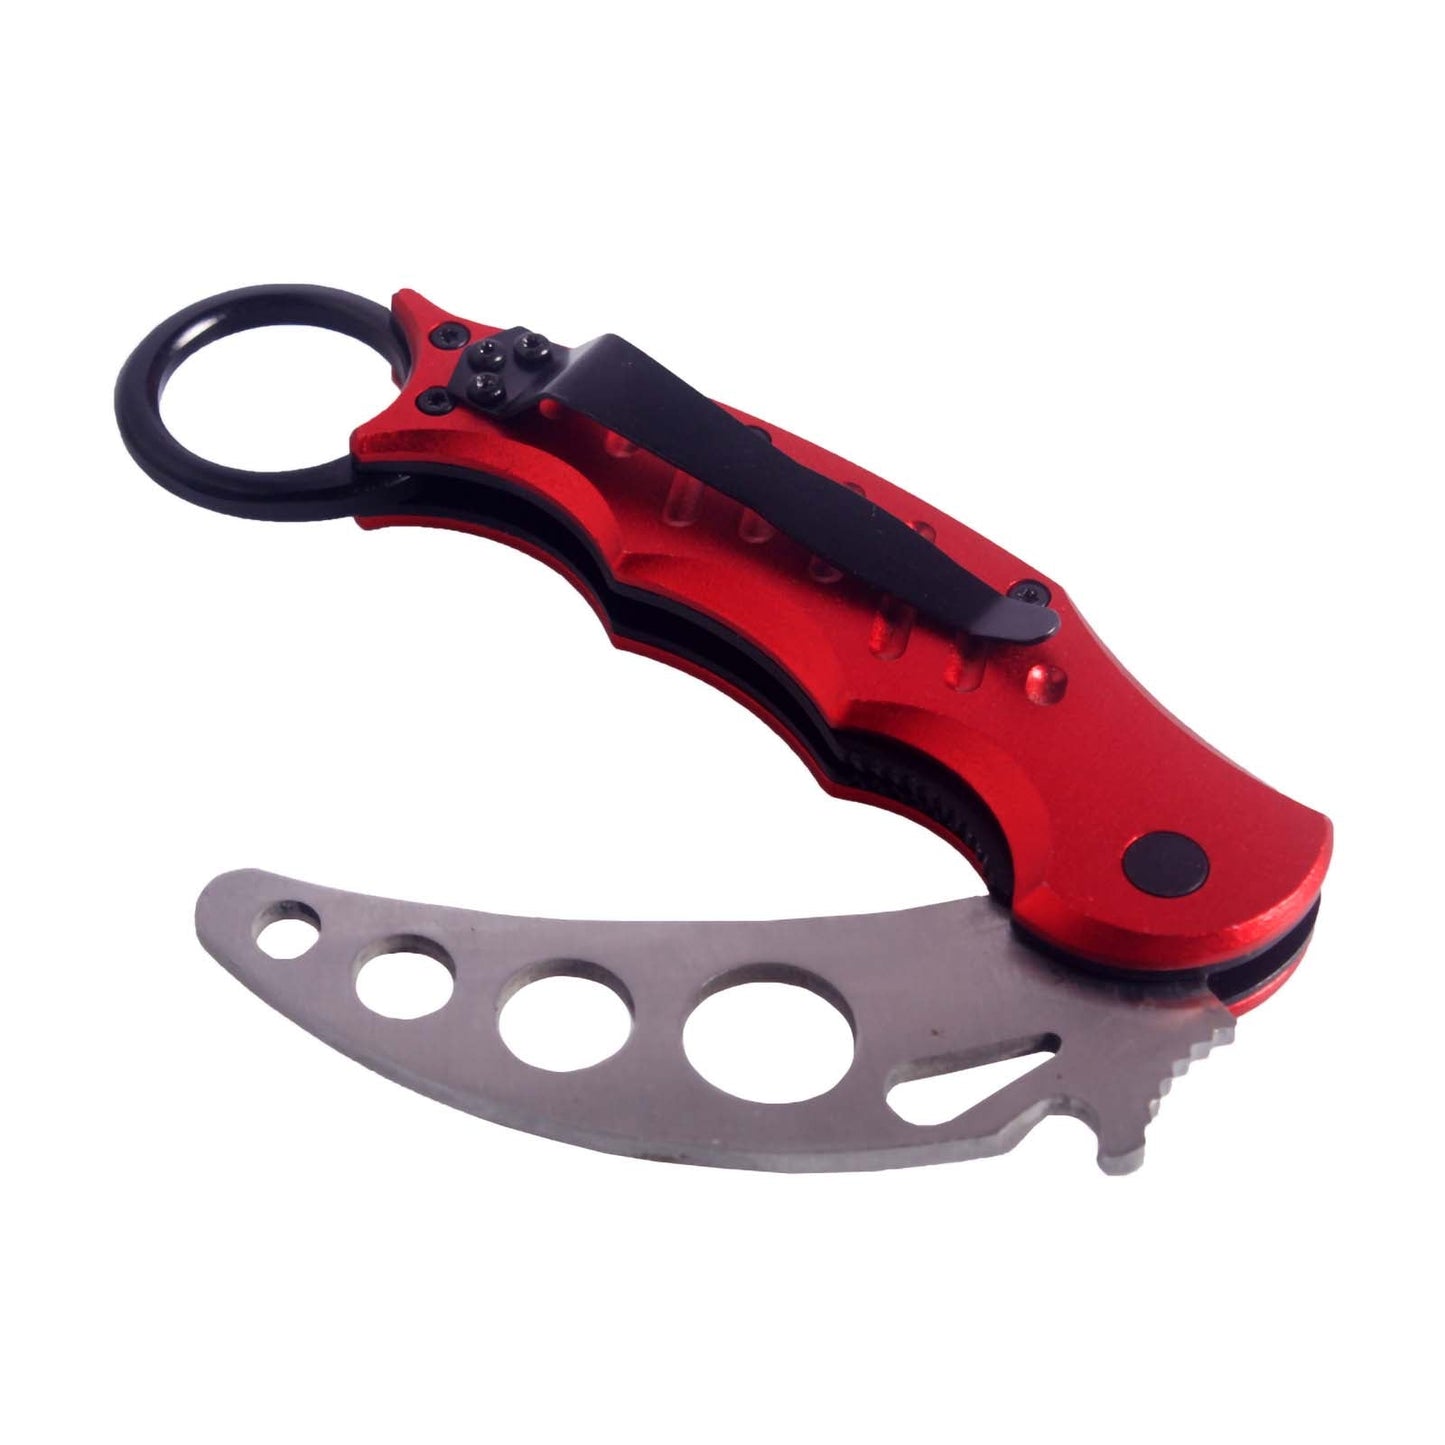 Andux Claw Knife Karambit Trainer Foldable Knife CS/WD01 (Red)